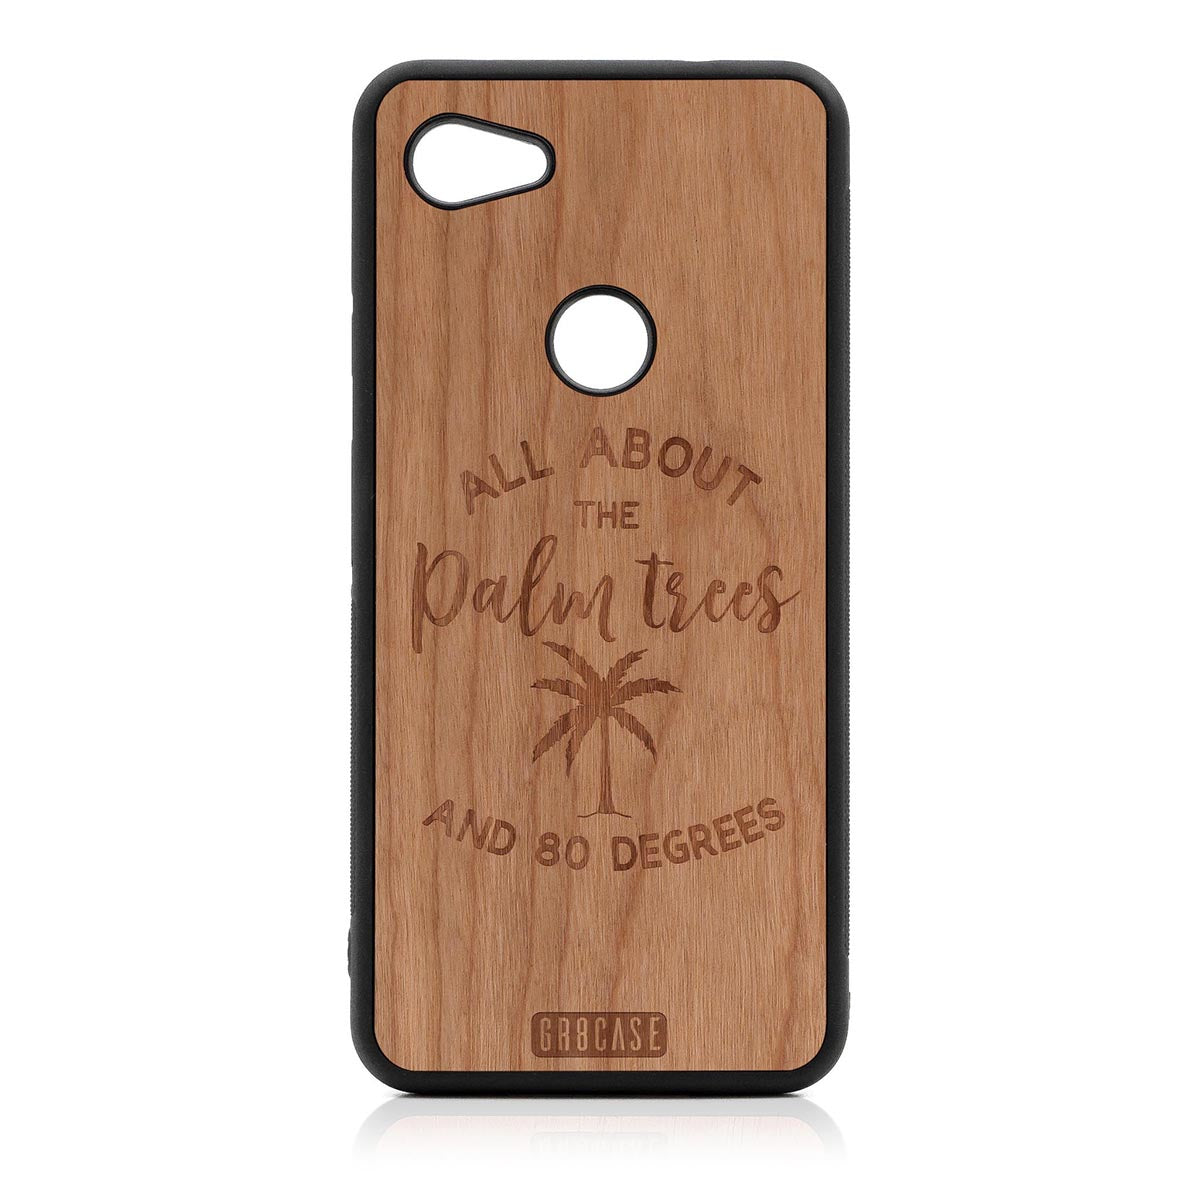 All About The Palm Trees and 80 Degrees Design Wood Case For Google Pixel 3A by GR8CASE